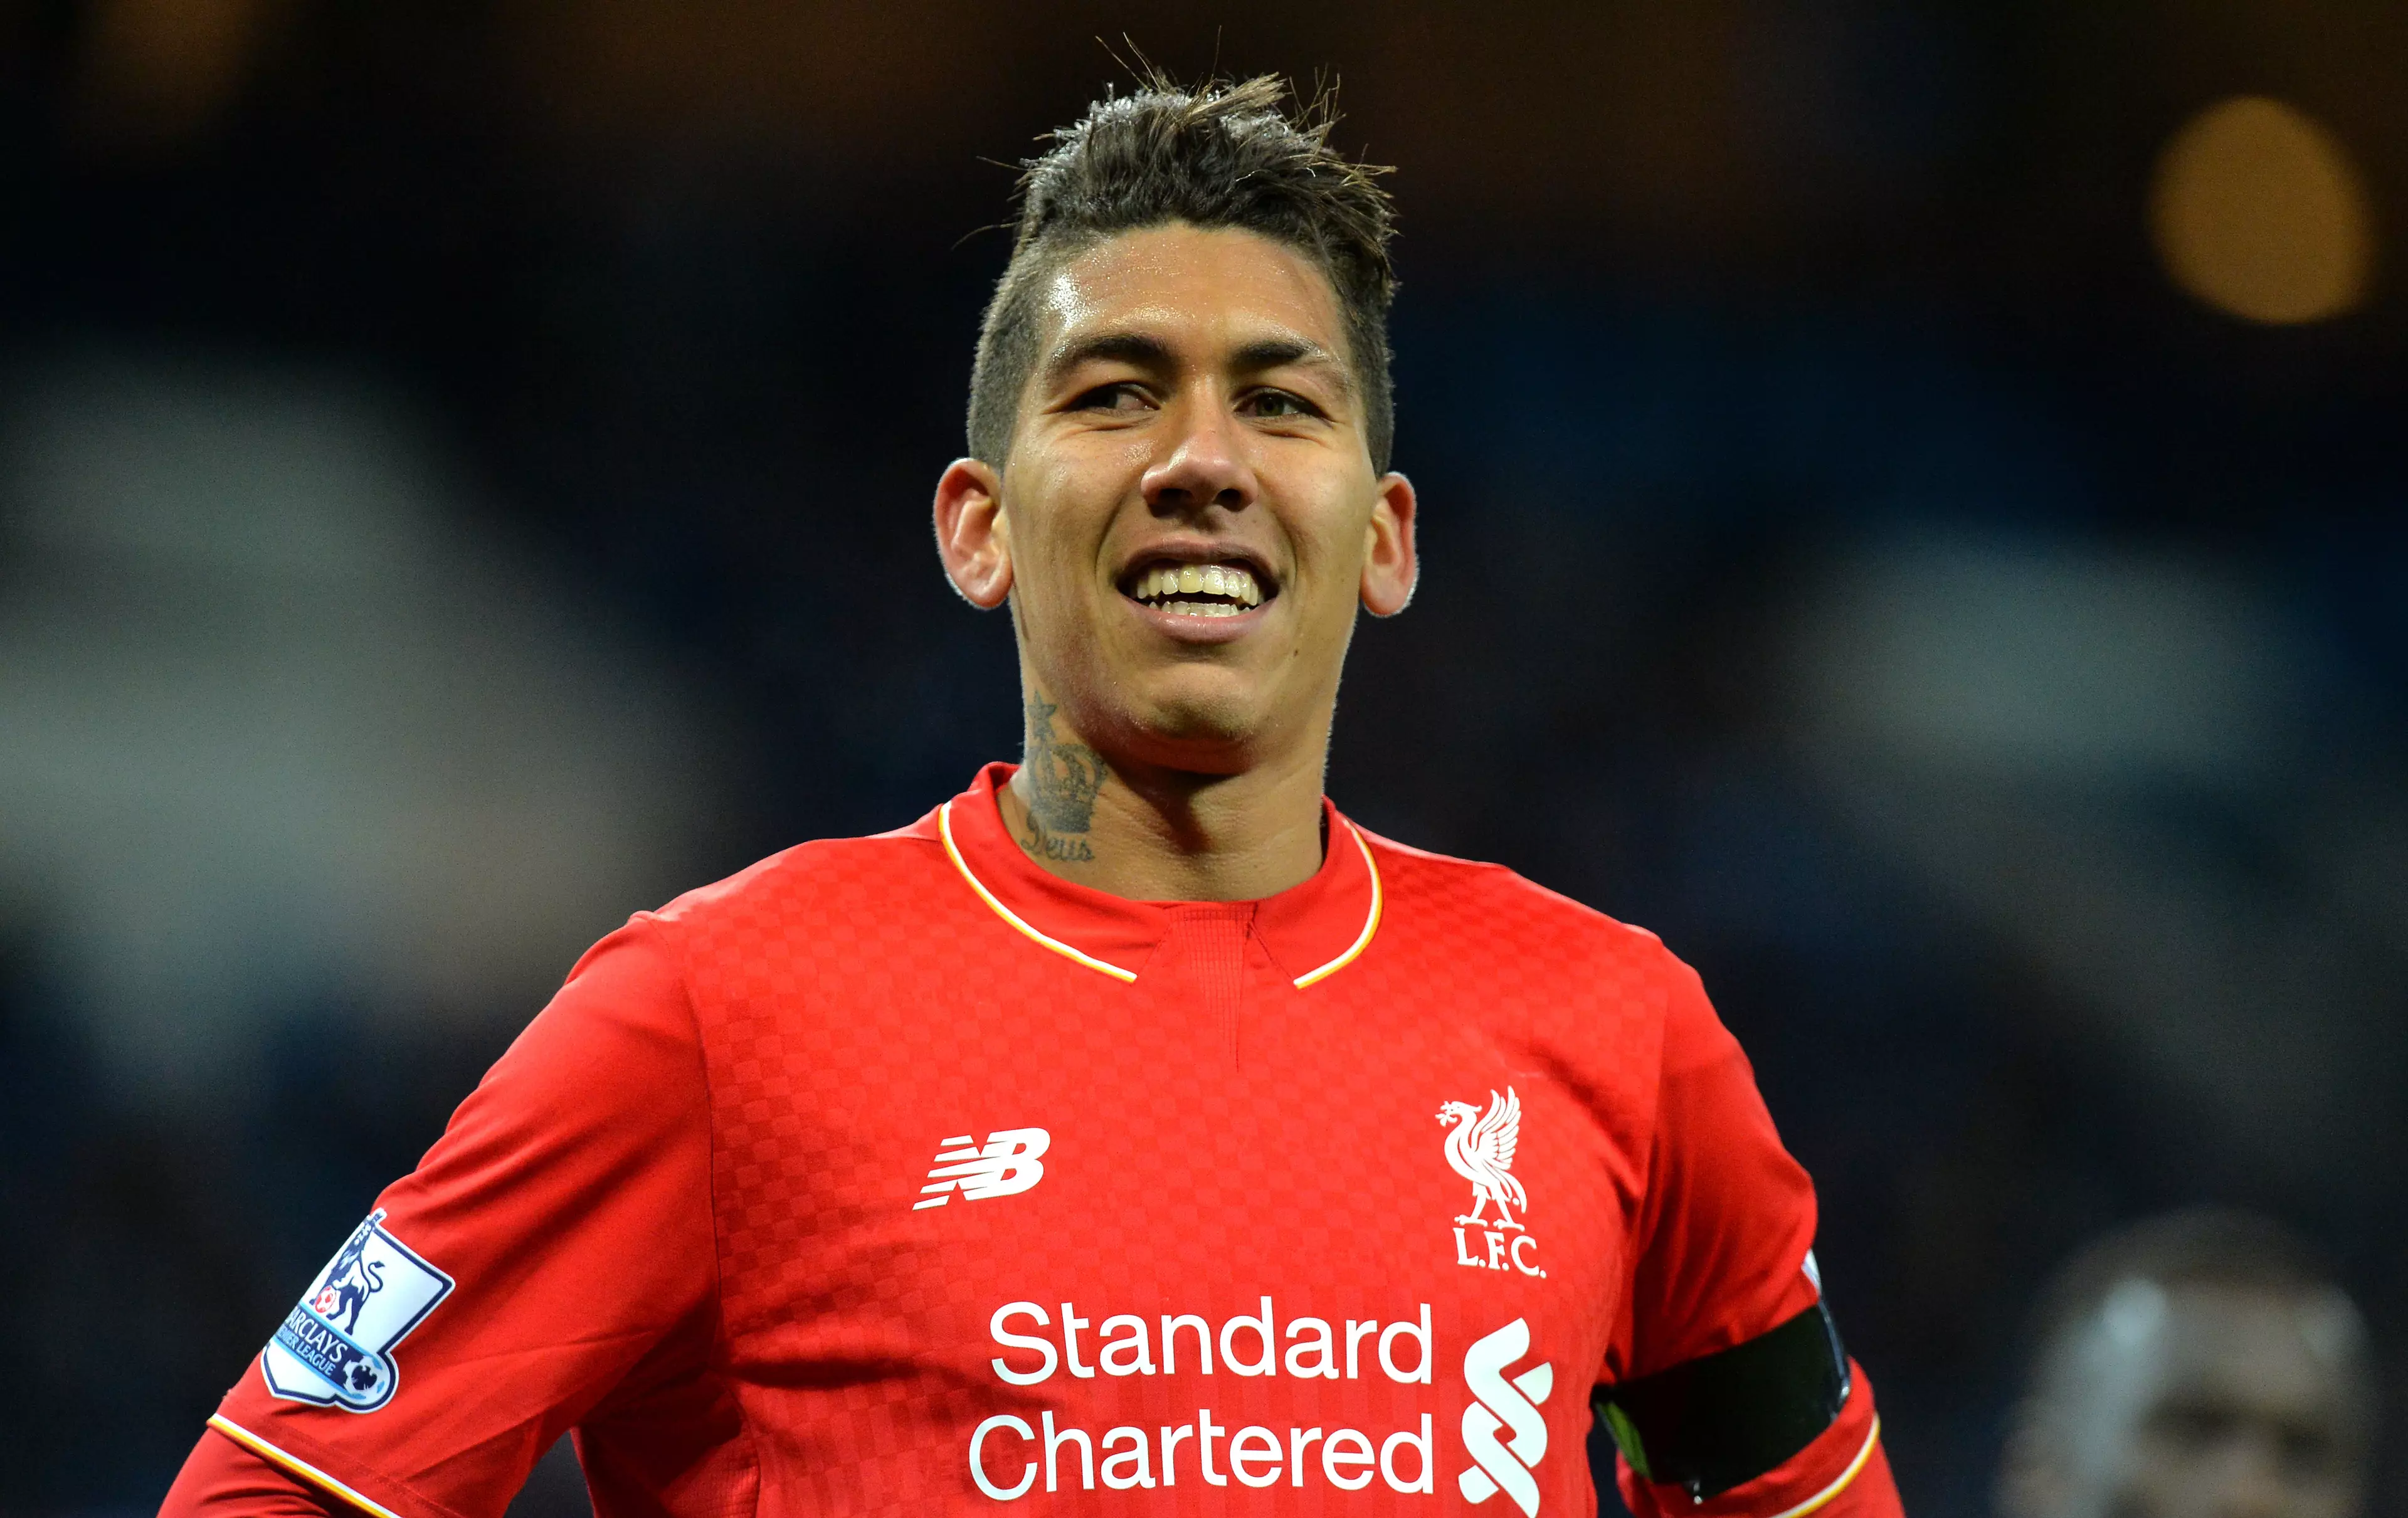 Roberto Firmino Returns To Liverpool Training Looking Noticeably Overweight